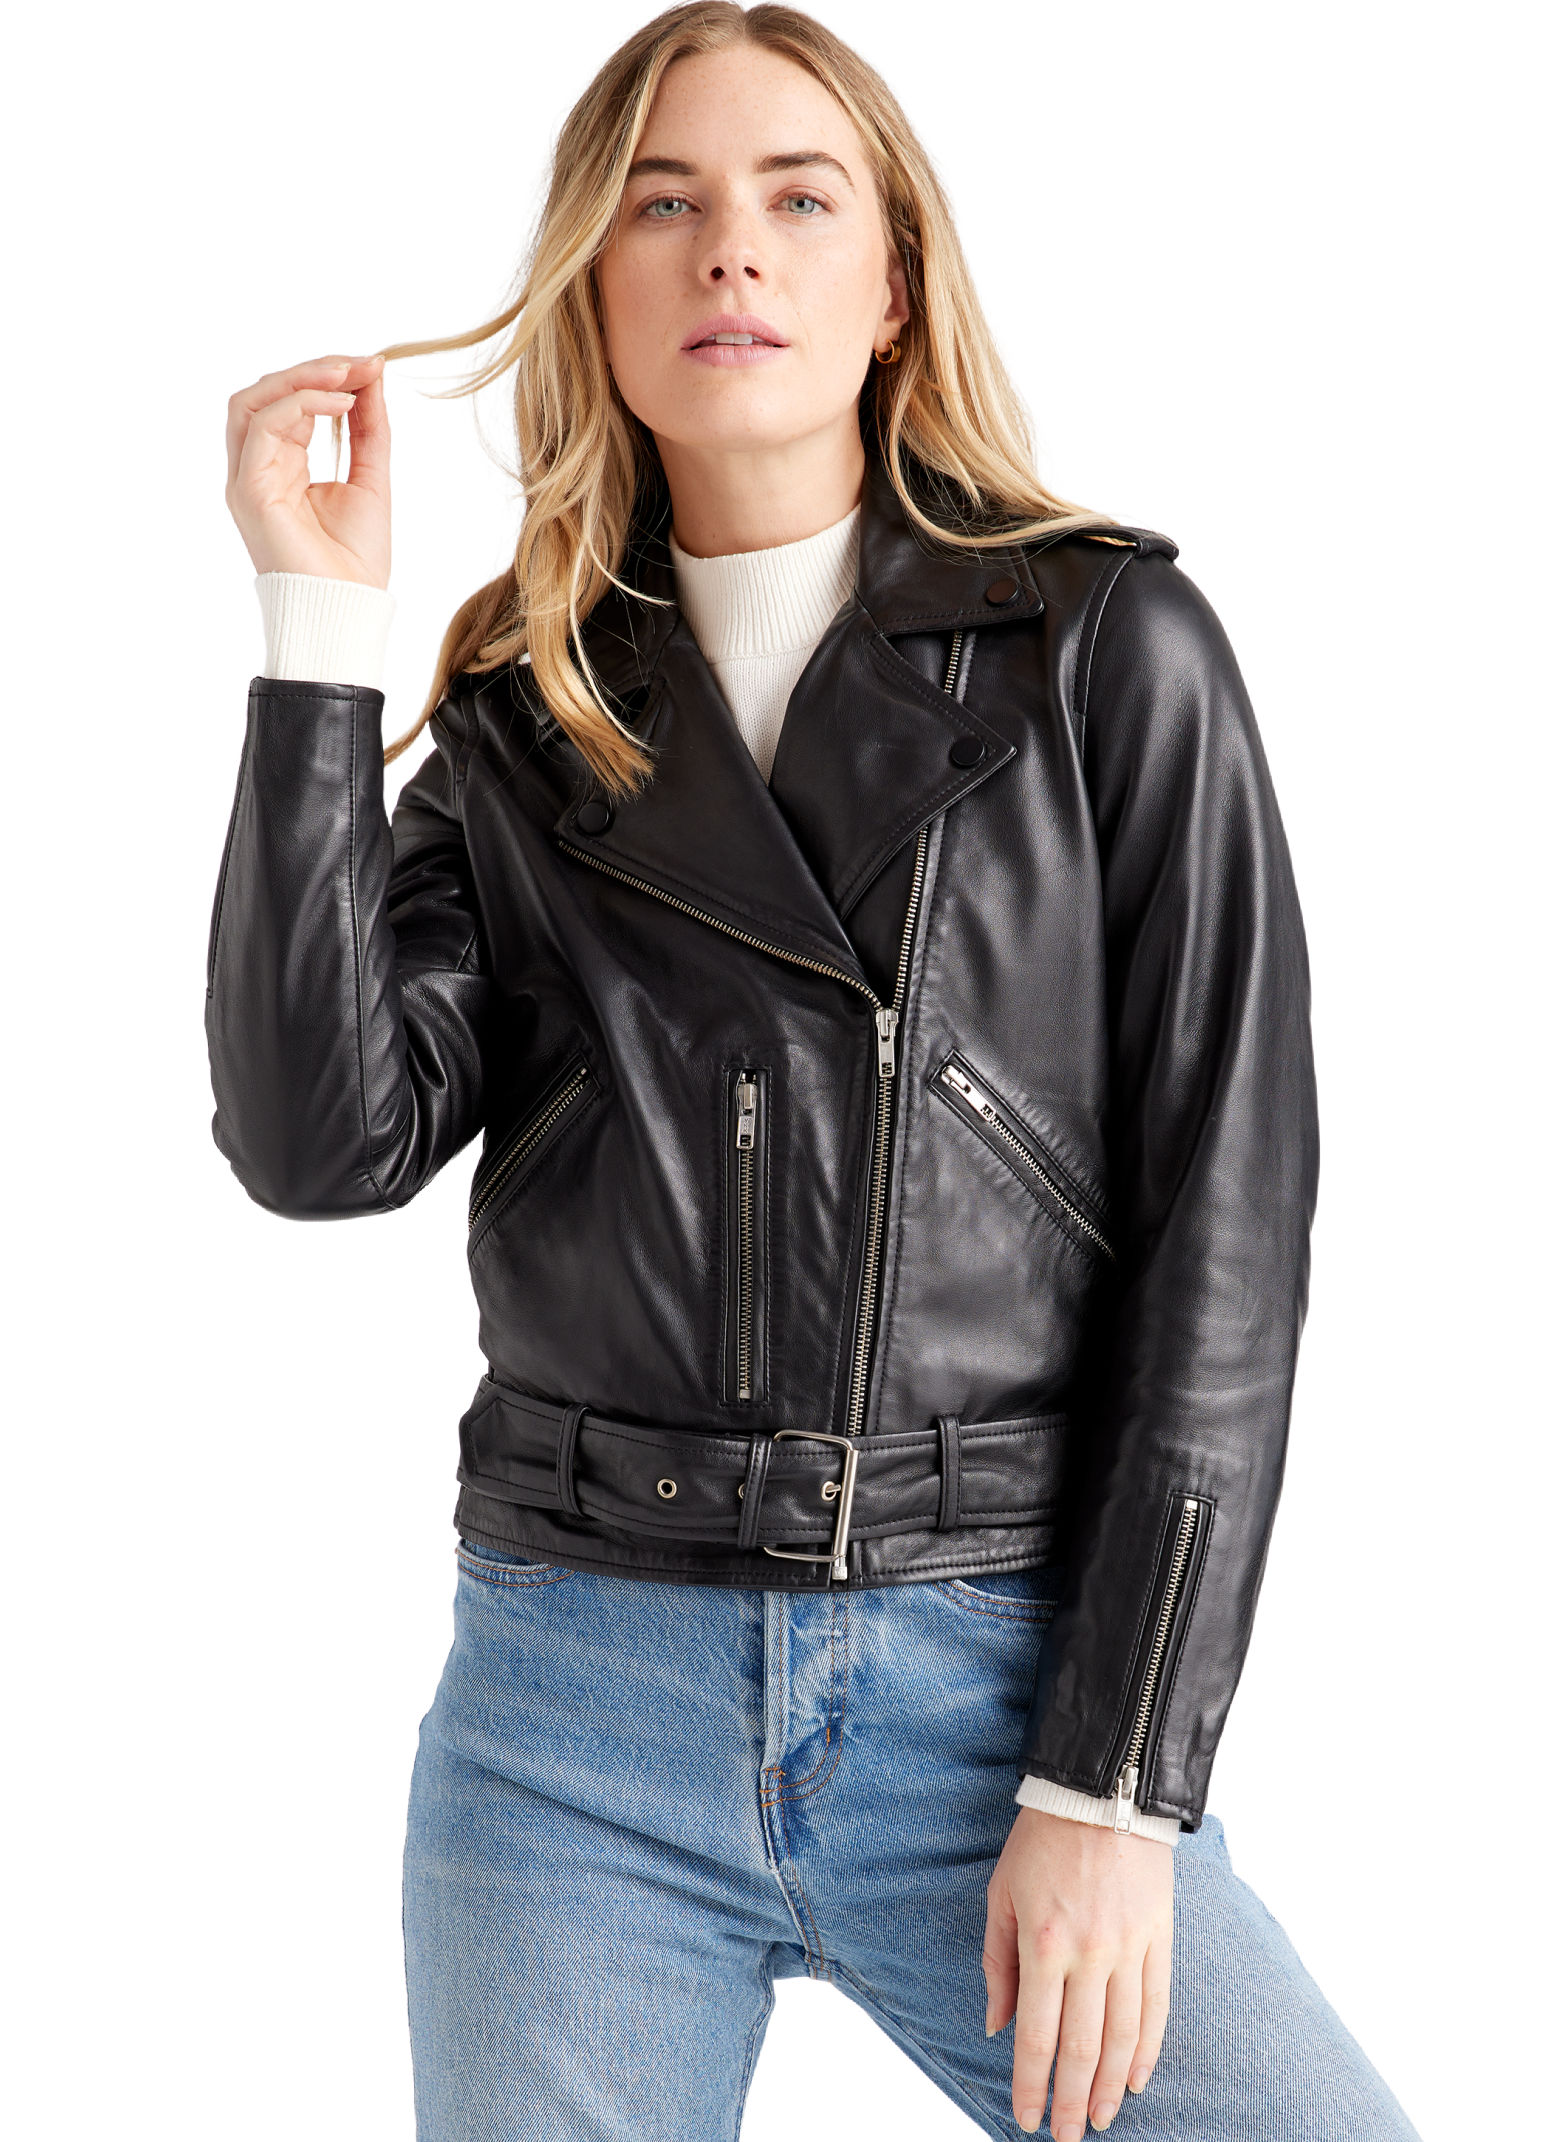 how-to-wear-a-leather-jacket